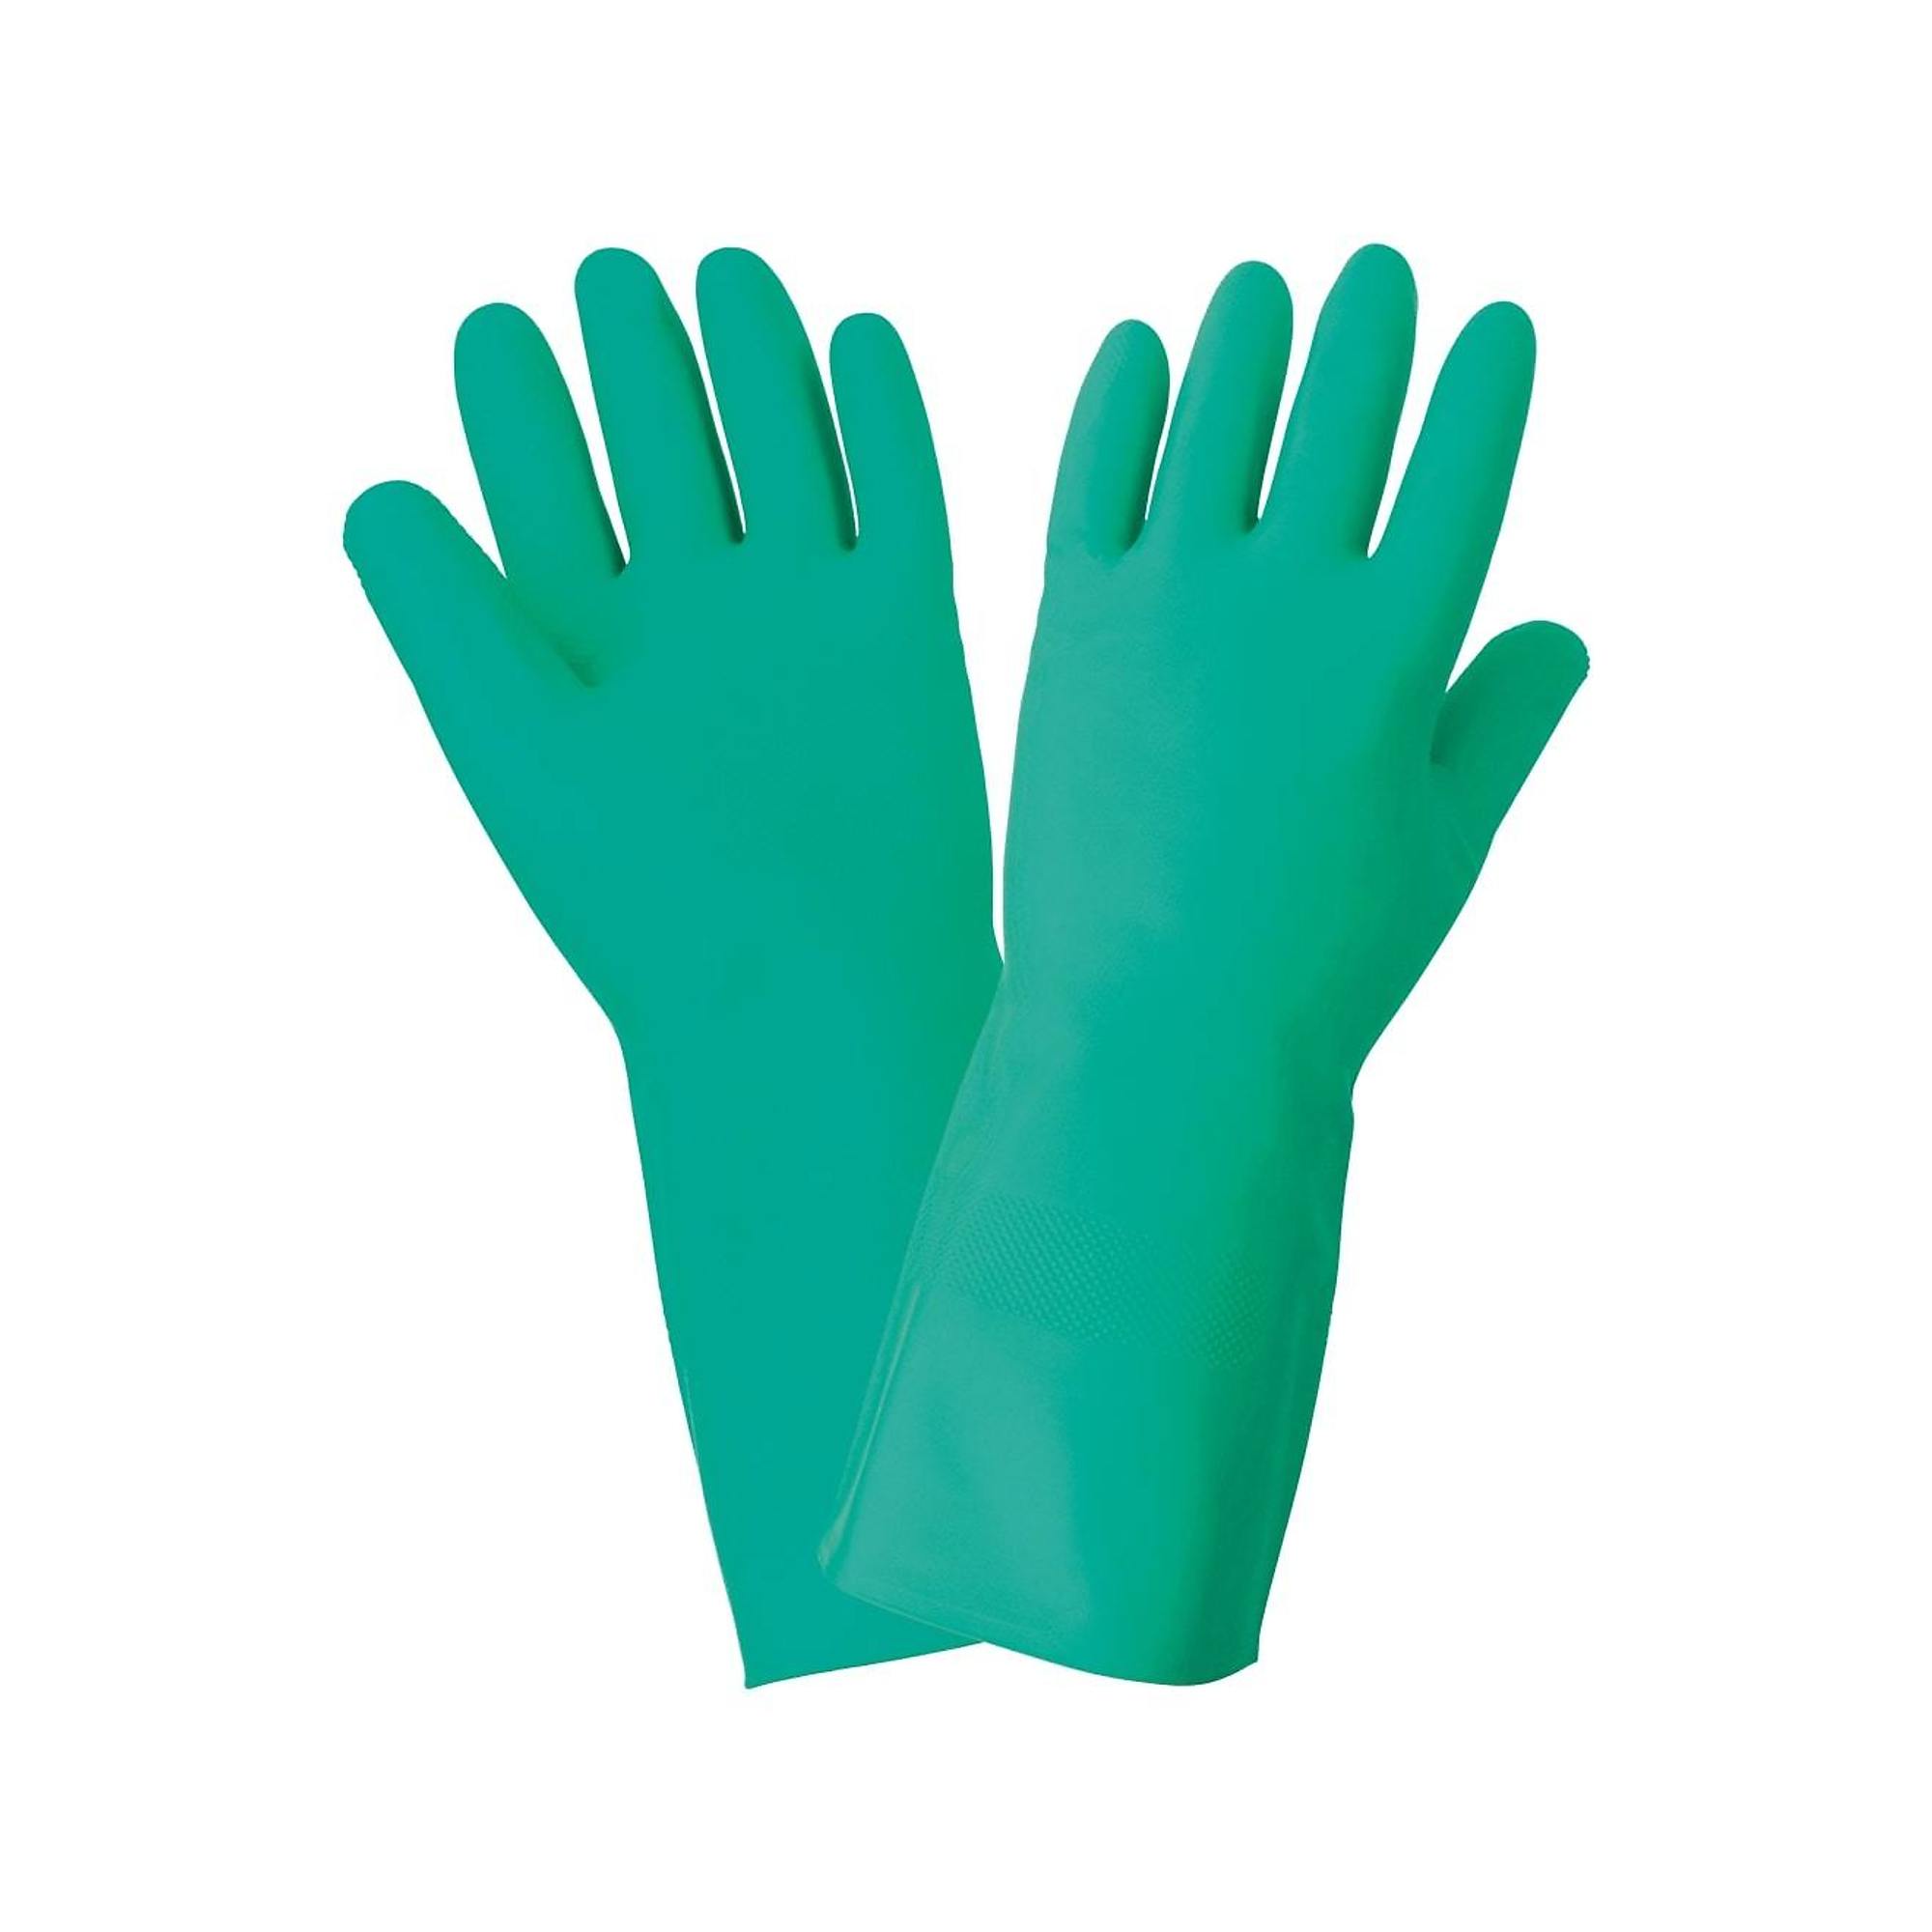 FrogWear, 12-Mil, 13Inch, Unlined, Nitrile Diamond Grip Gloves - 12 Pairs, Size 3XL, Color Green, Included (qty.) 12 Model 515-12(3XL)